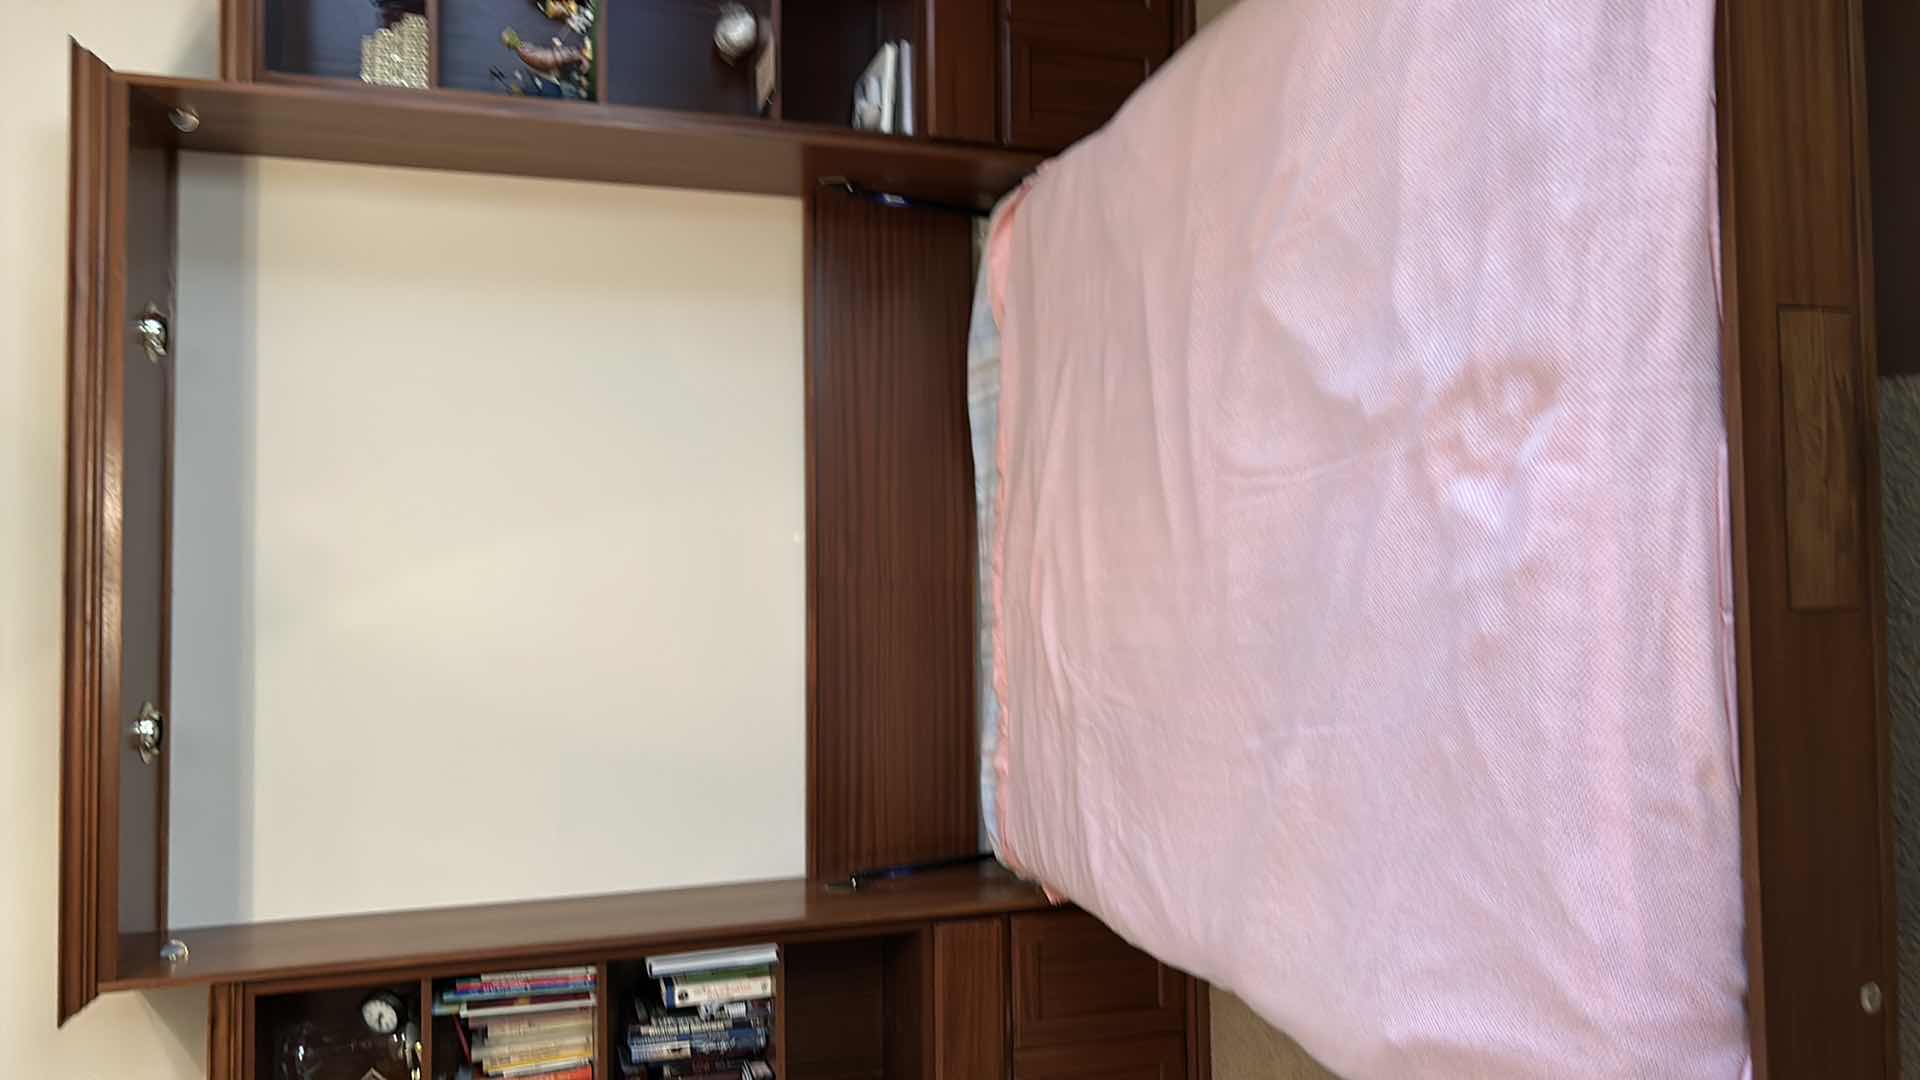 Photo 11 of WOOD MURPHY BED WITH CABINETS mattress is 62” x 81” ENTIRE UNIT 111” x 17” x 87”